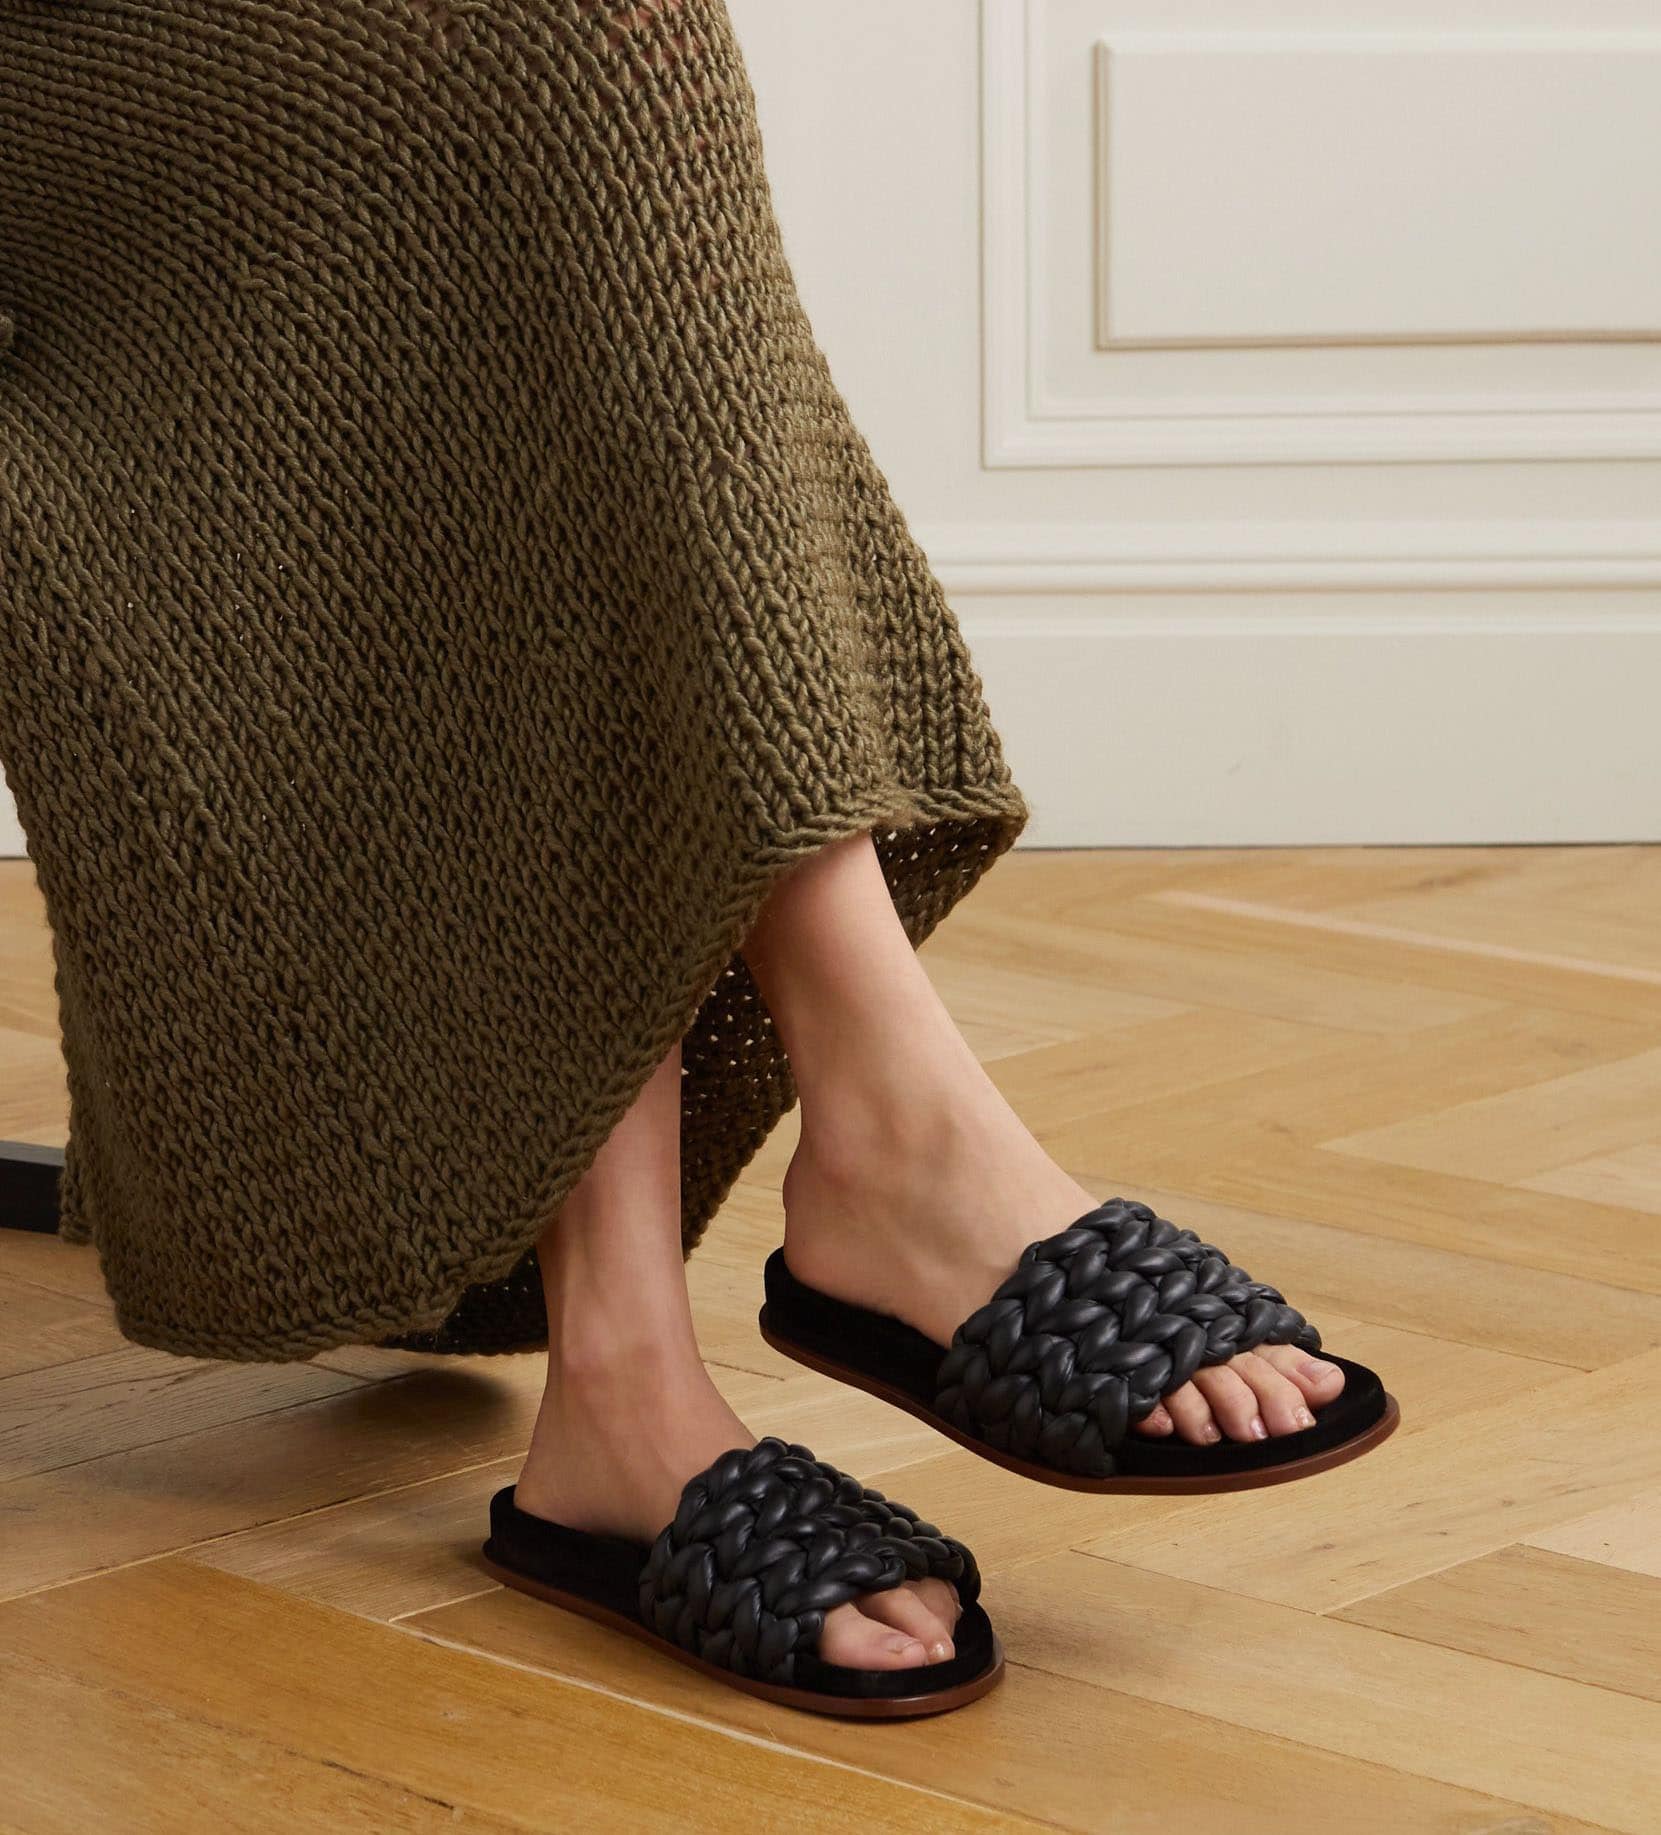 The Chloe Kacey slides are woven from panels of supple leather to achieve a braided finish